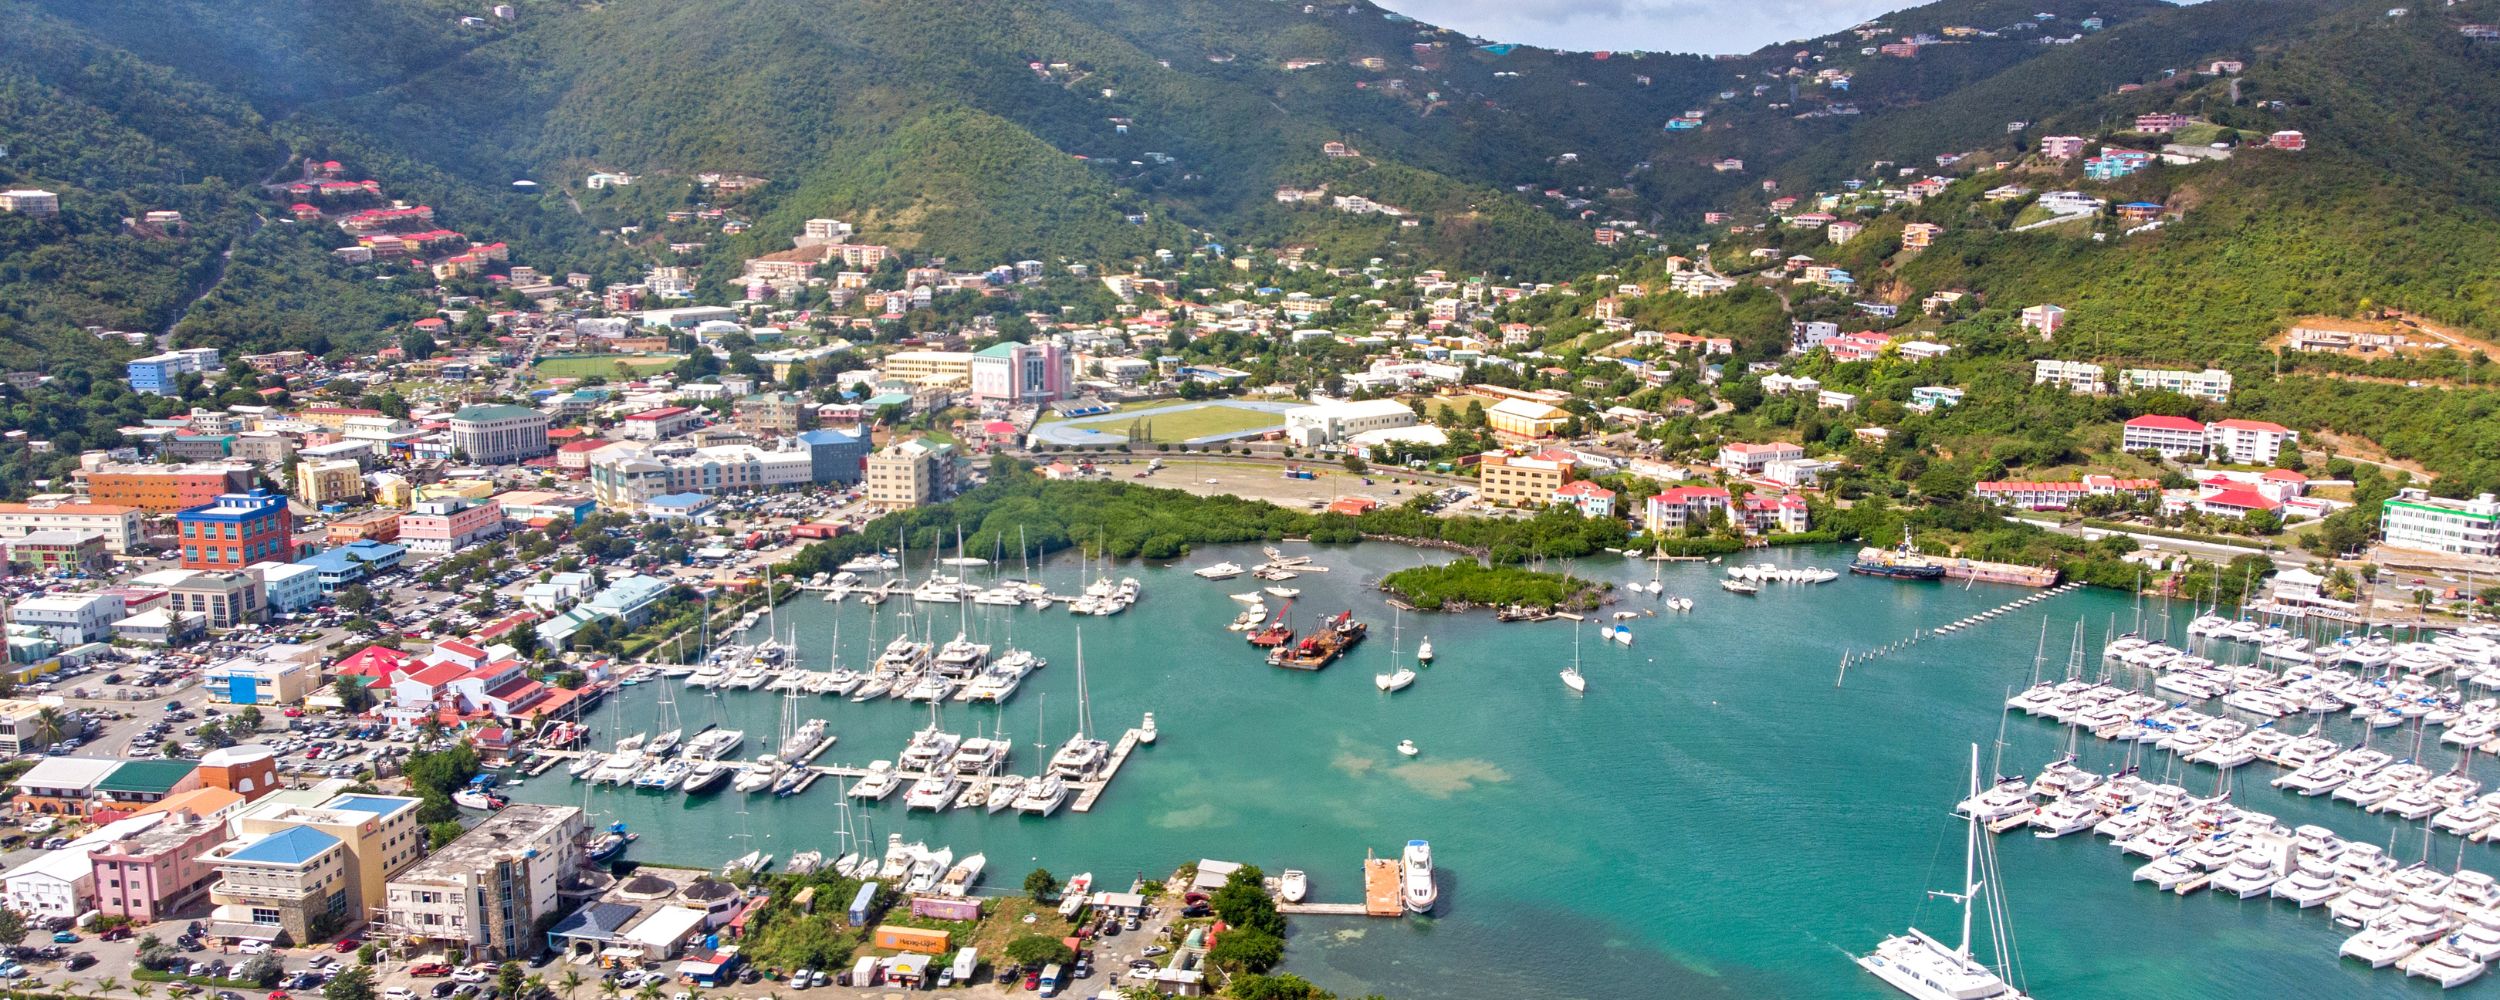 Spencer West Law Firm in BVI